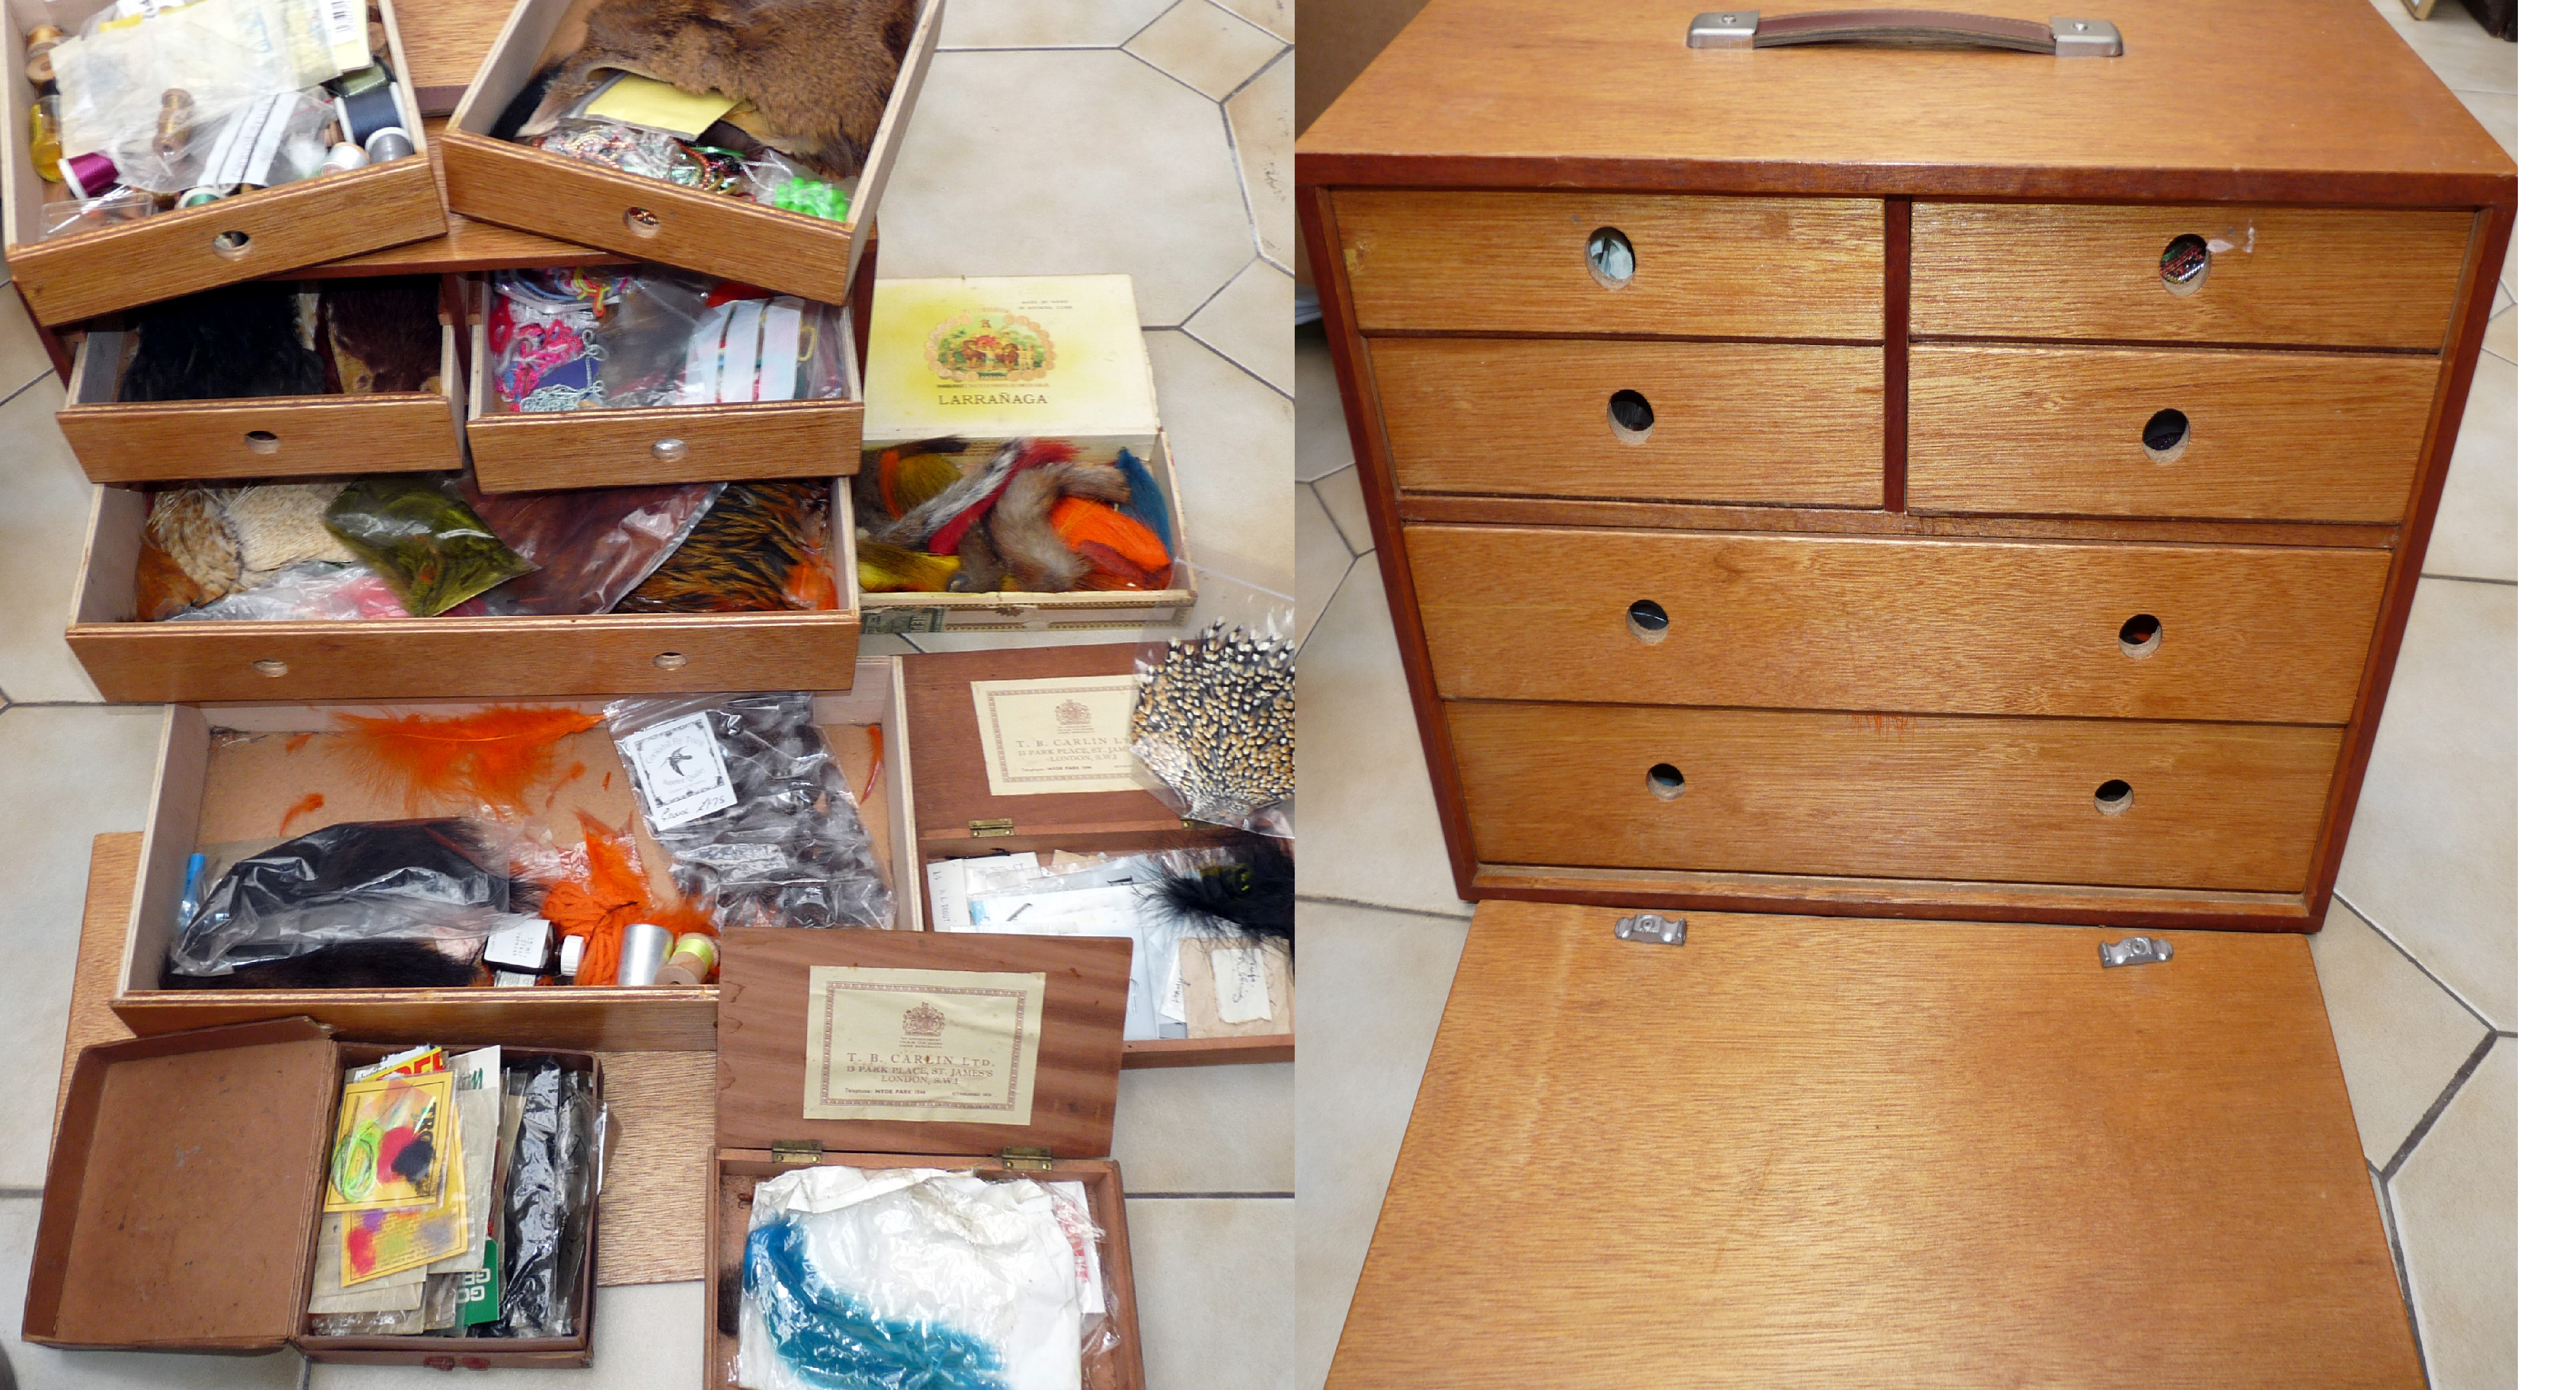 FLY TYING MATERIALS: Wood portable fly tiers chest with drop down front with 6 slide drawers holding